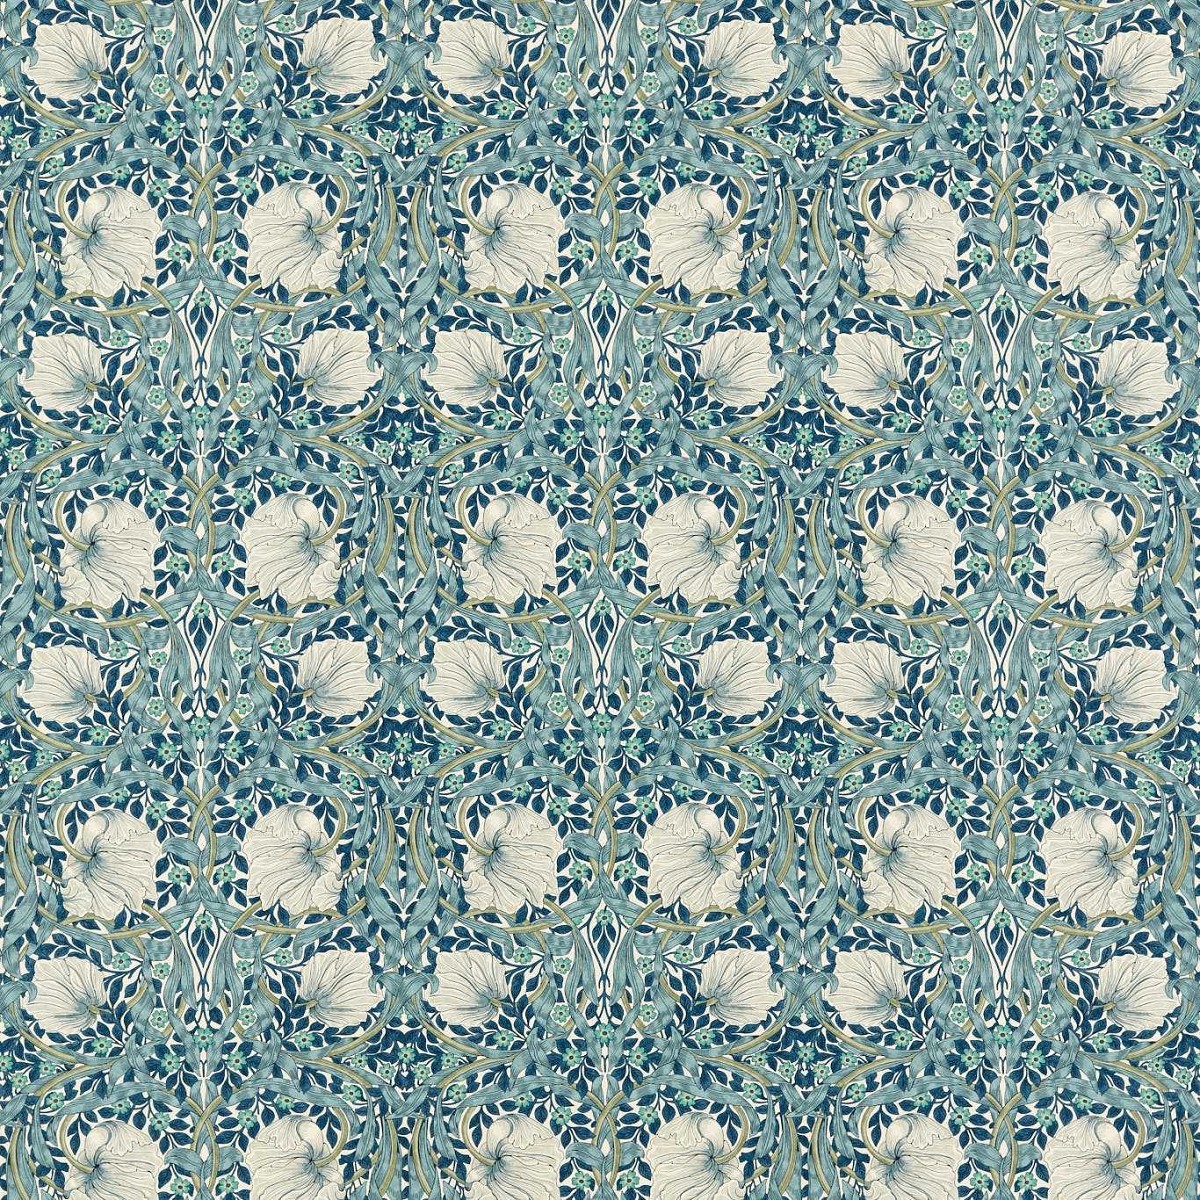 Pimpernel Cobalt/Mineral Fabric by William Morris & Co.